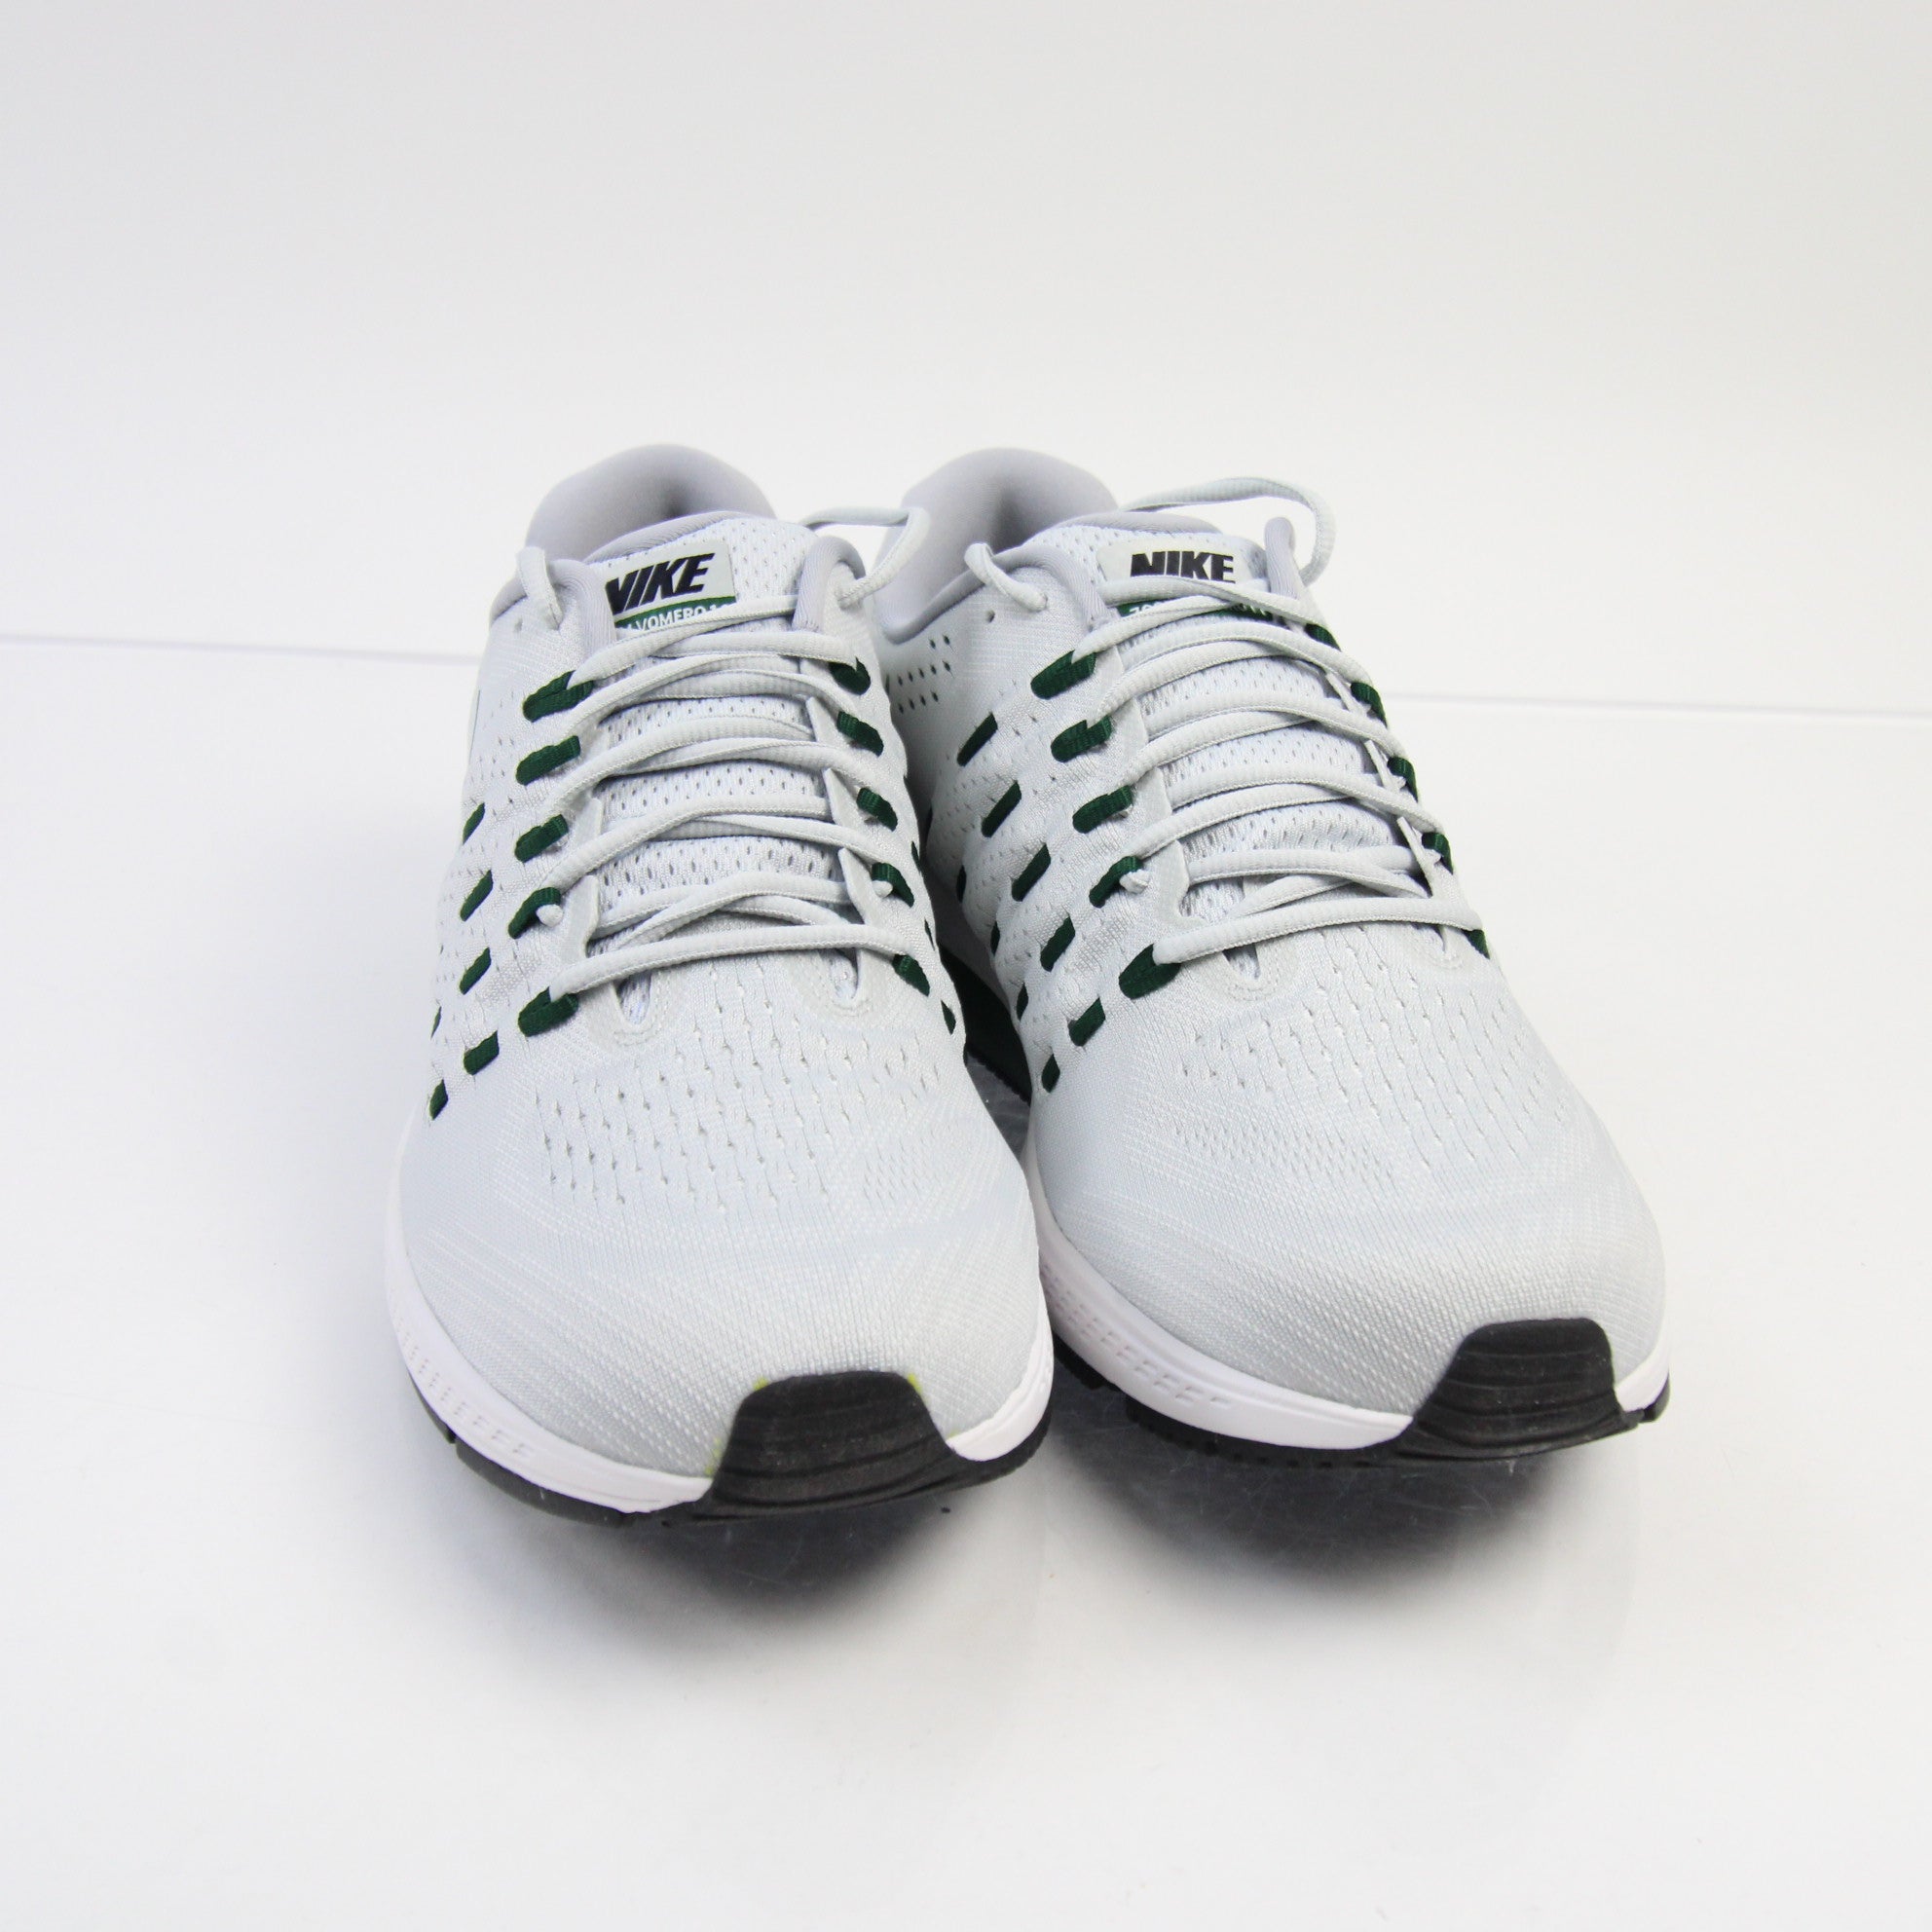 Running Jogging Shoes Men's Light New without Box 8.5 | SidelineSwap